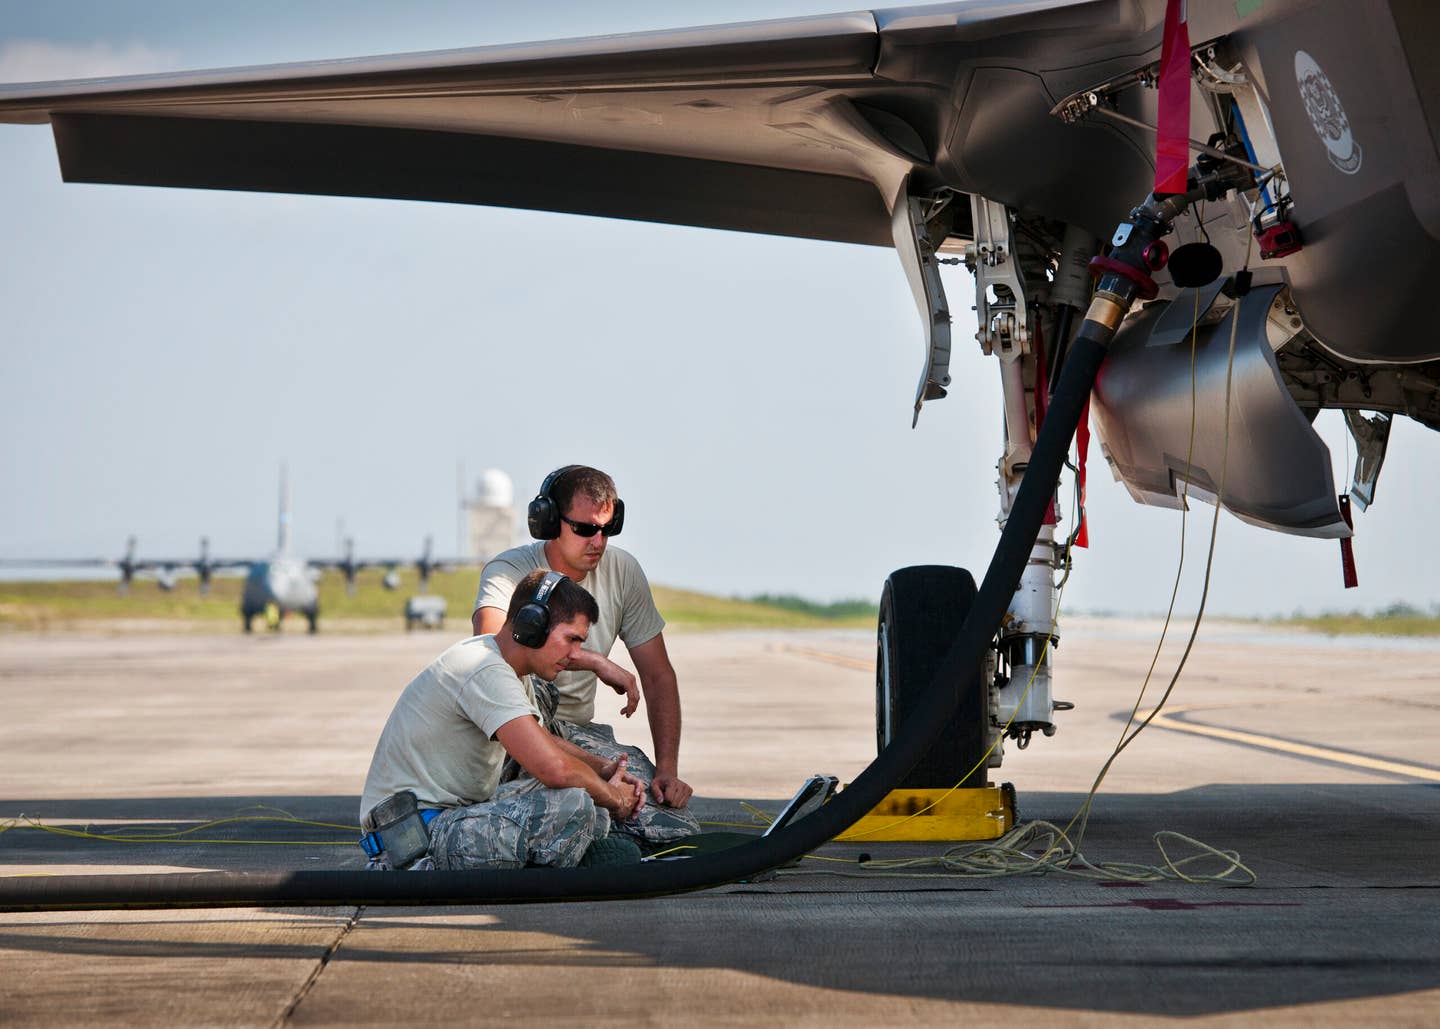 Staff Sgts Todd Bedo and Wayne Singleton, 33rd Fighter Wing, monitor a laptop connected to an F-35A Lightning II during post flight checks after the aircraft landed at Duke Field, Fla. (U.S. Air Force photo/Tech. Sgt. Sam King)